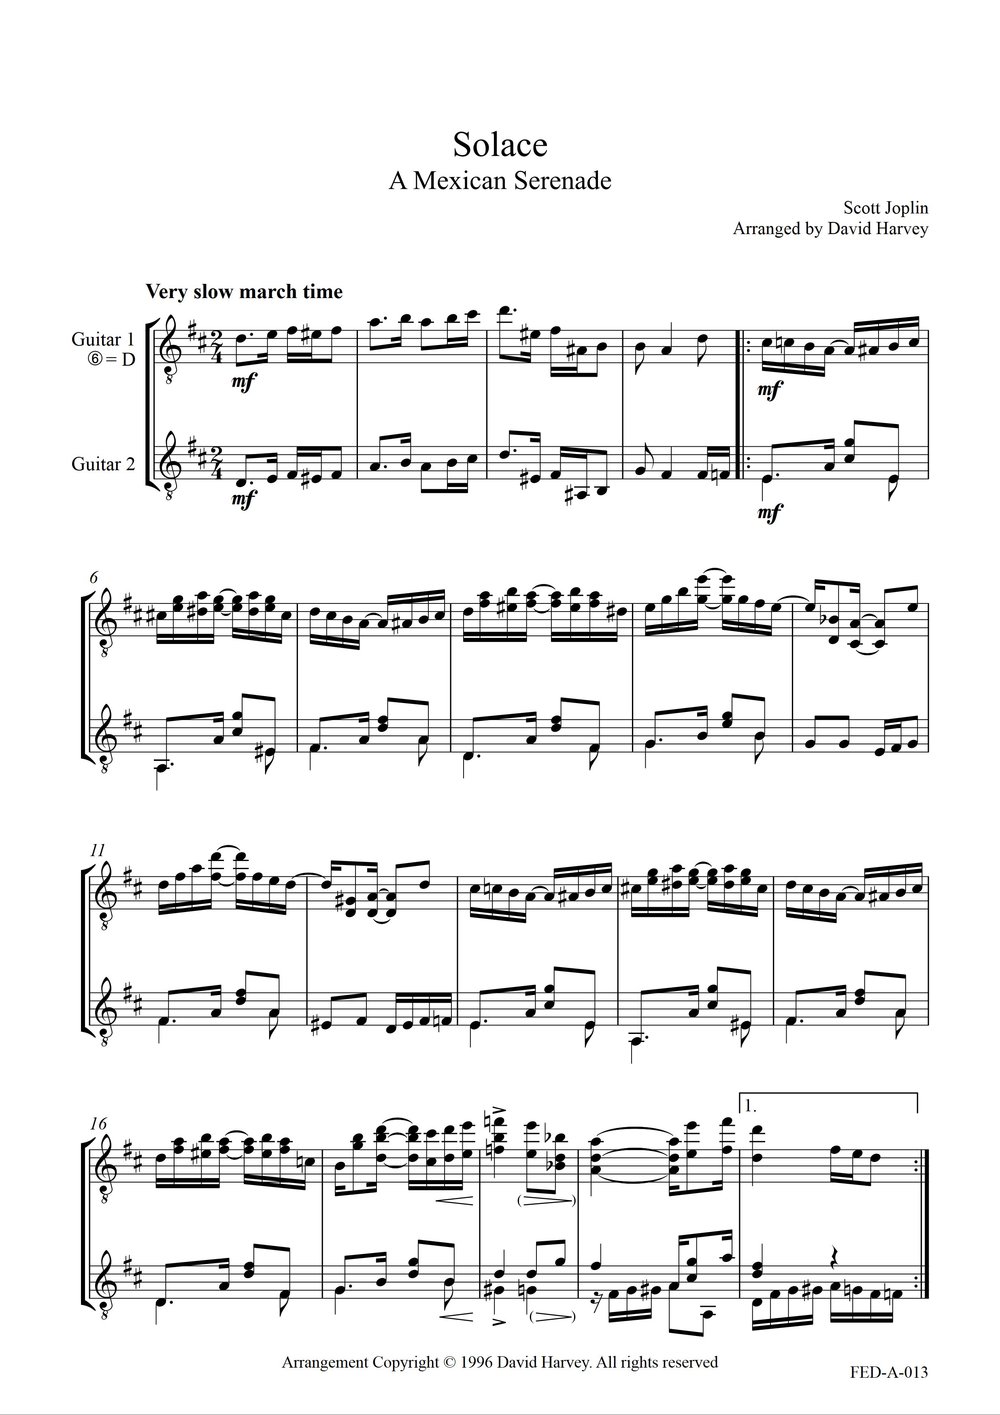 Solace - a Mexican Serenade - sample page